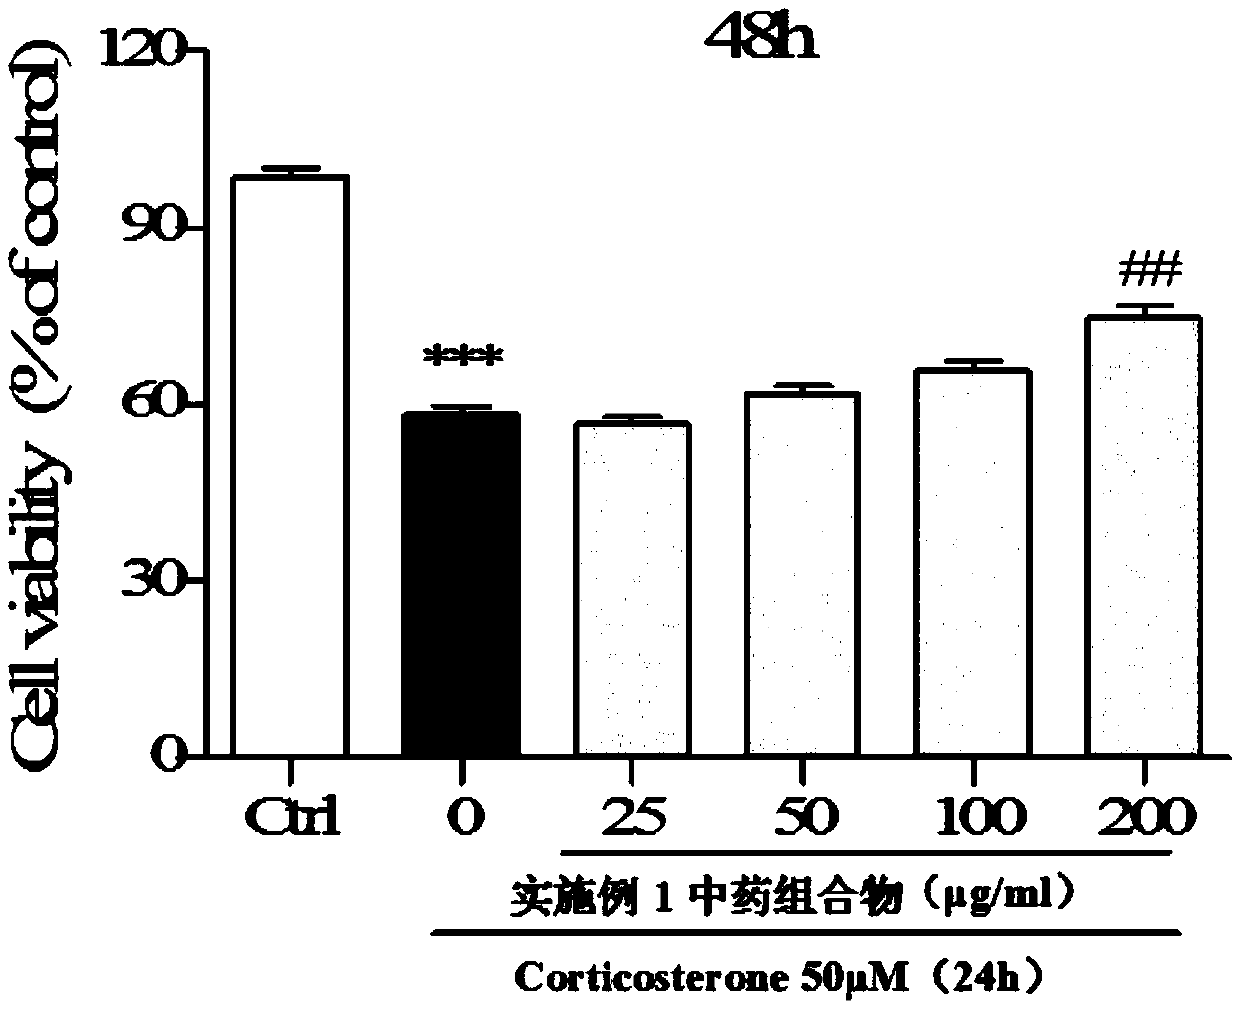 New application of traditional Chinese medicine composition in preparation of antidepressant drugs